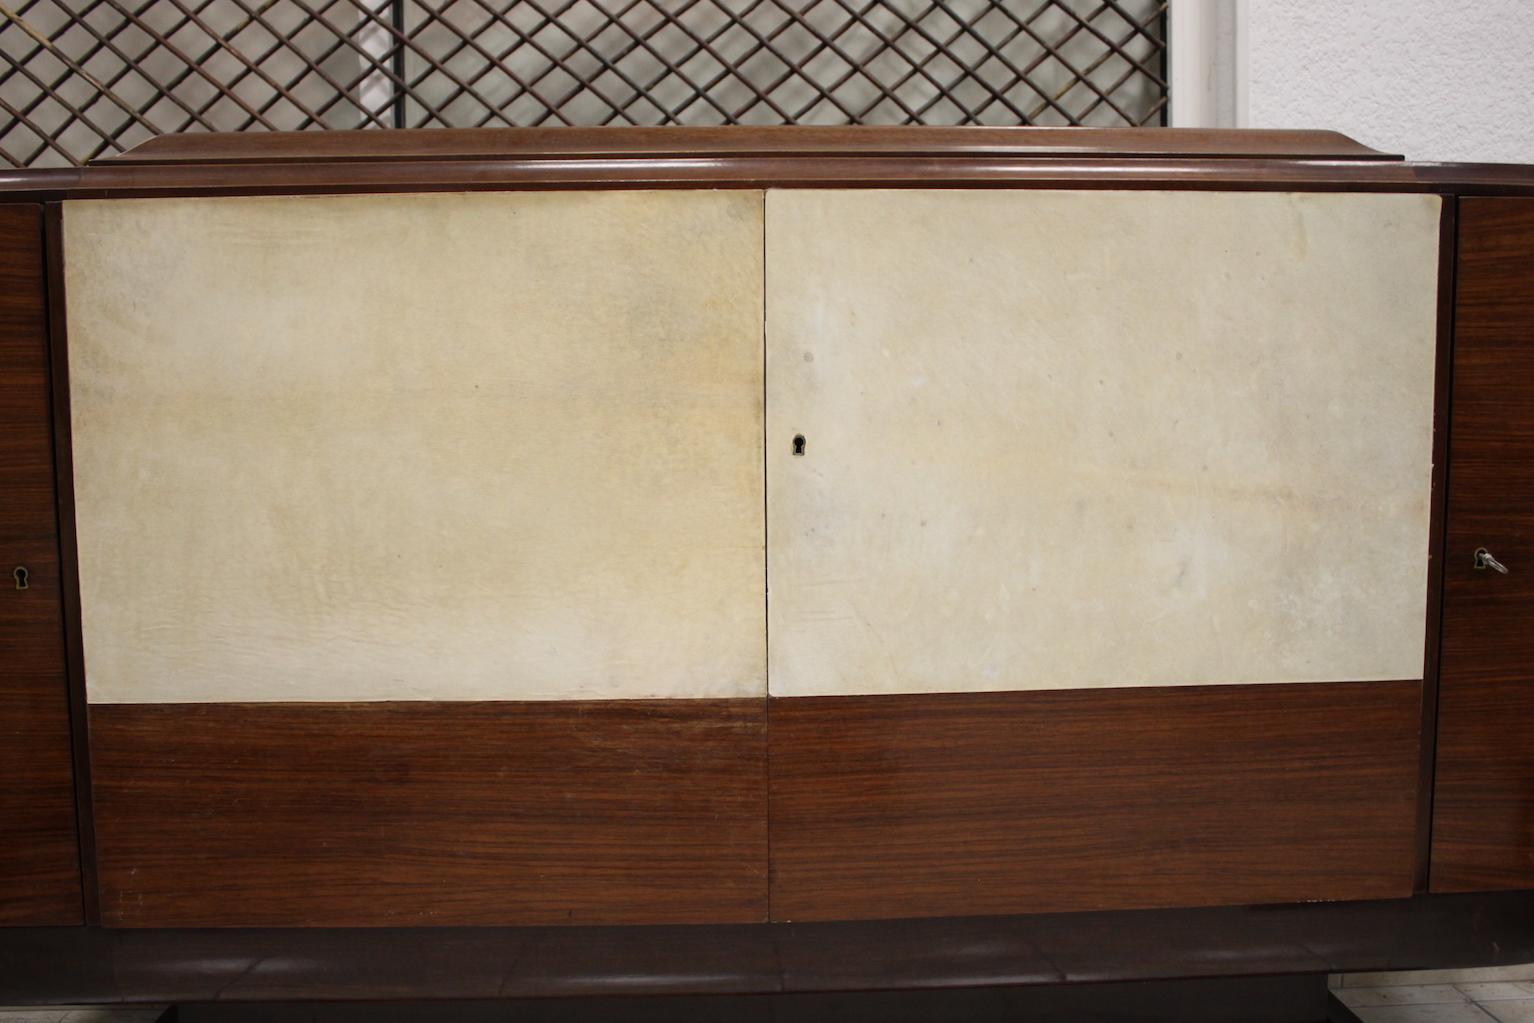 Credenza in veneer with parchment panels, probably made by 1930s designer. In perfect condition.
Dimensions: width 195 cm, depth 50 cm, height 105 cm.